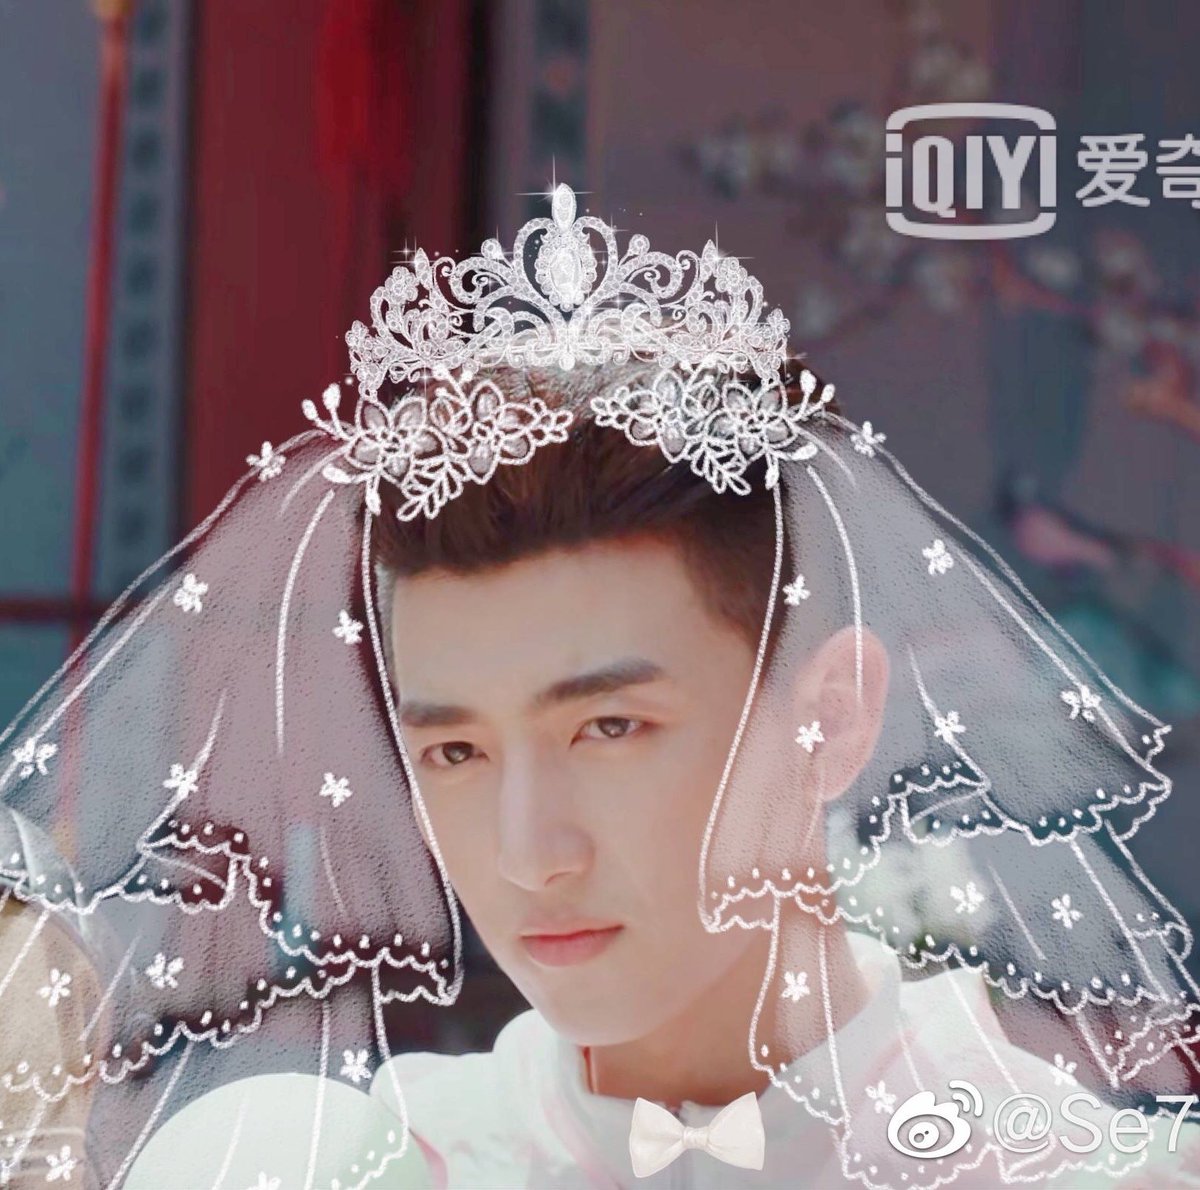 This bride with this groom please  #ultimatenote  #tlt3  #终极笔记  #liuyuhan  #刘昱晗  #刘宇宁  #liuyuning  #heihua